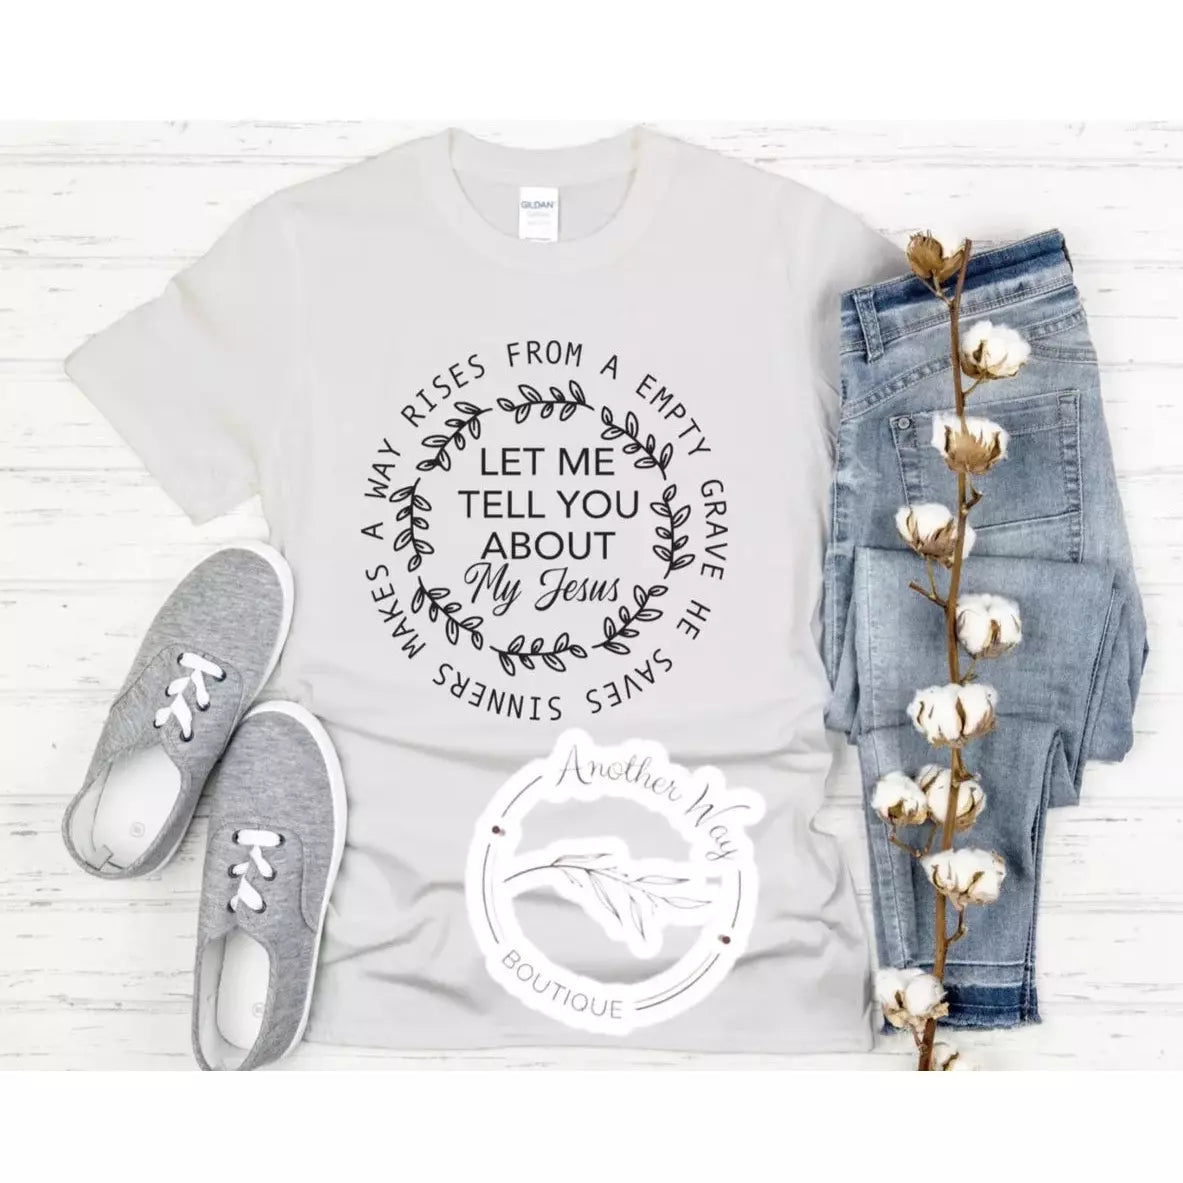 "Let me tell you about my Jesus" circle - Another Way Boutique